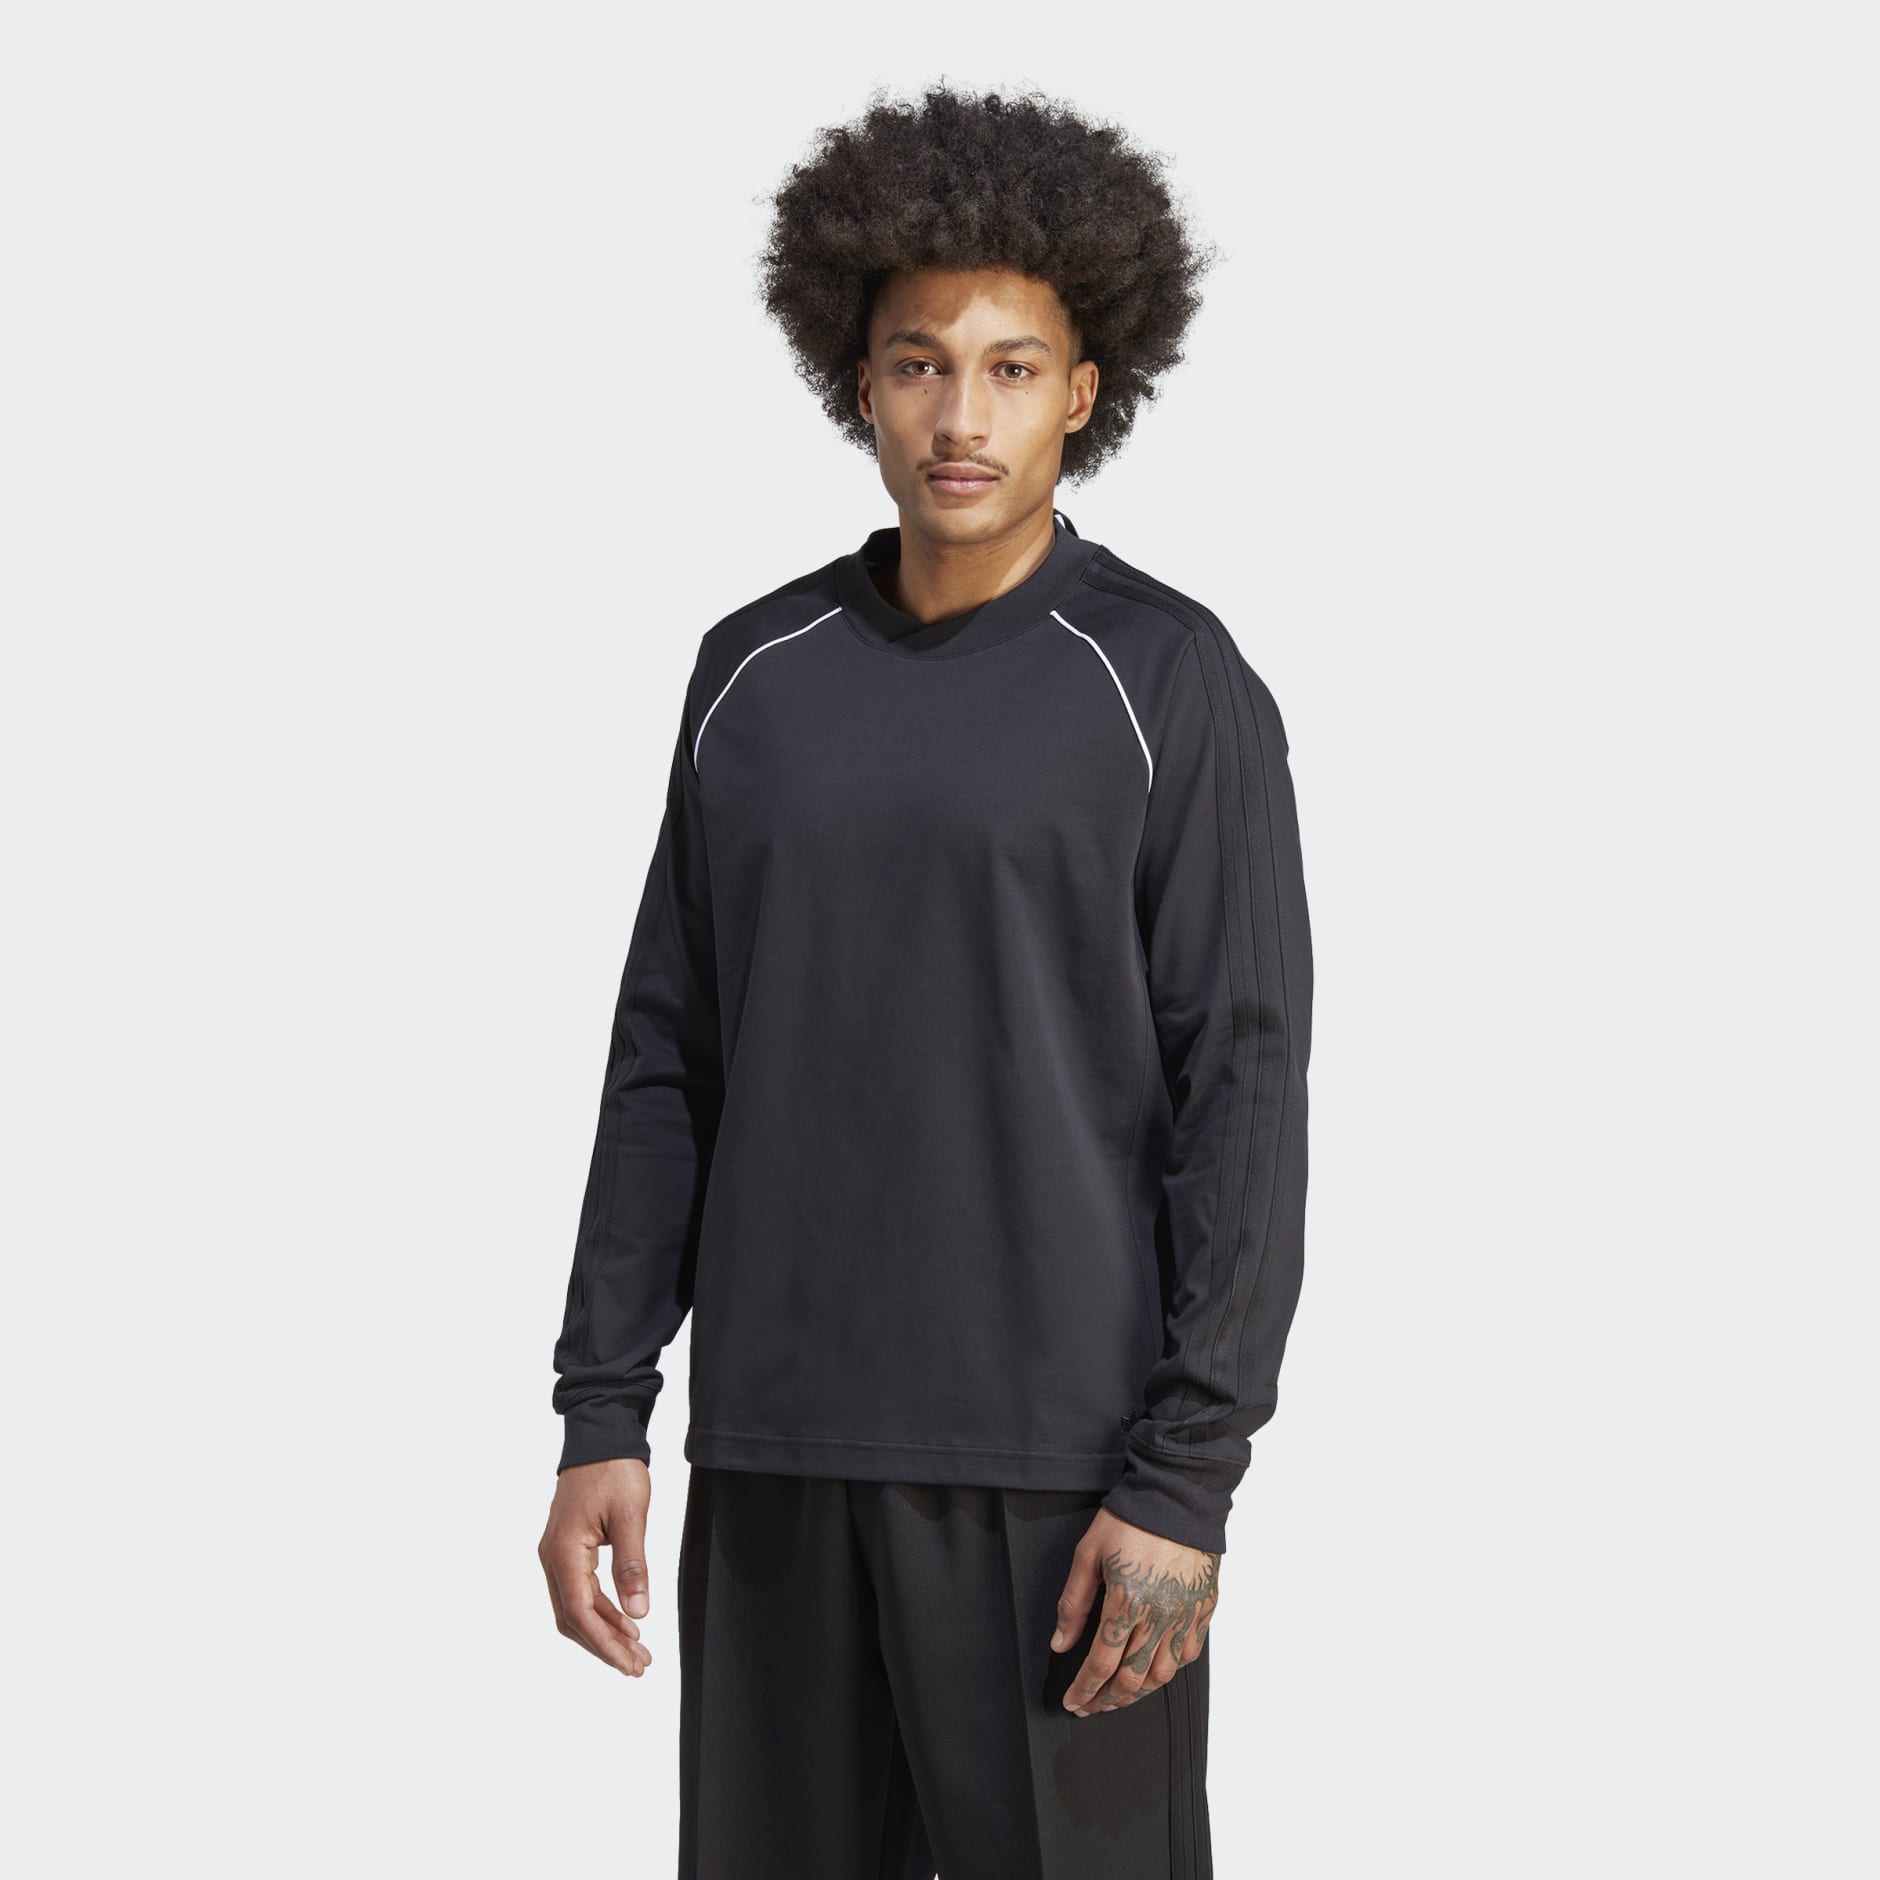 Clothing - Blue Version SST Long Sleeve Tee - Black | adidas South Africa